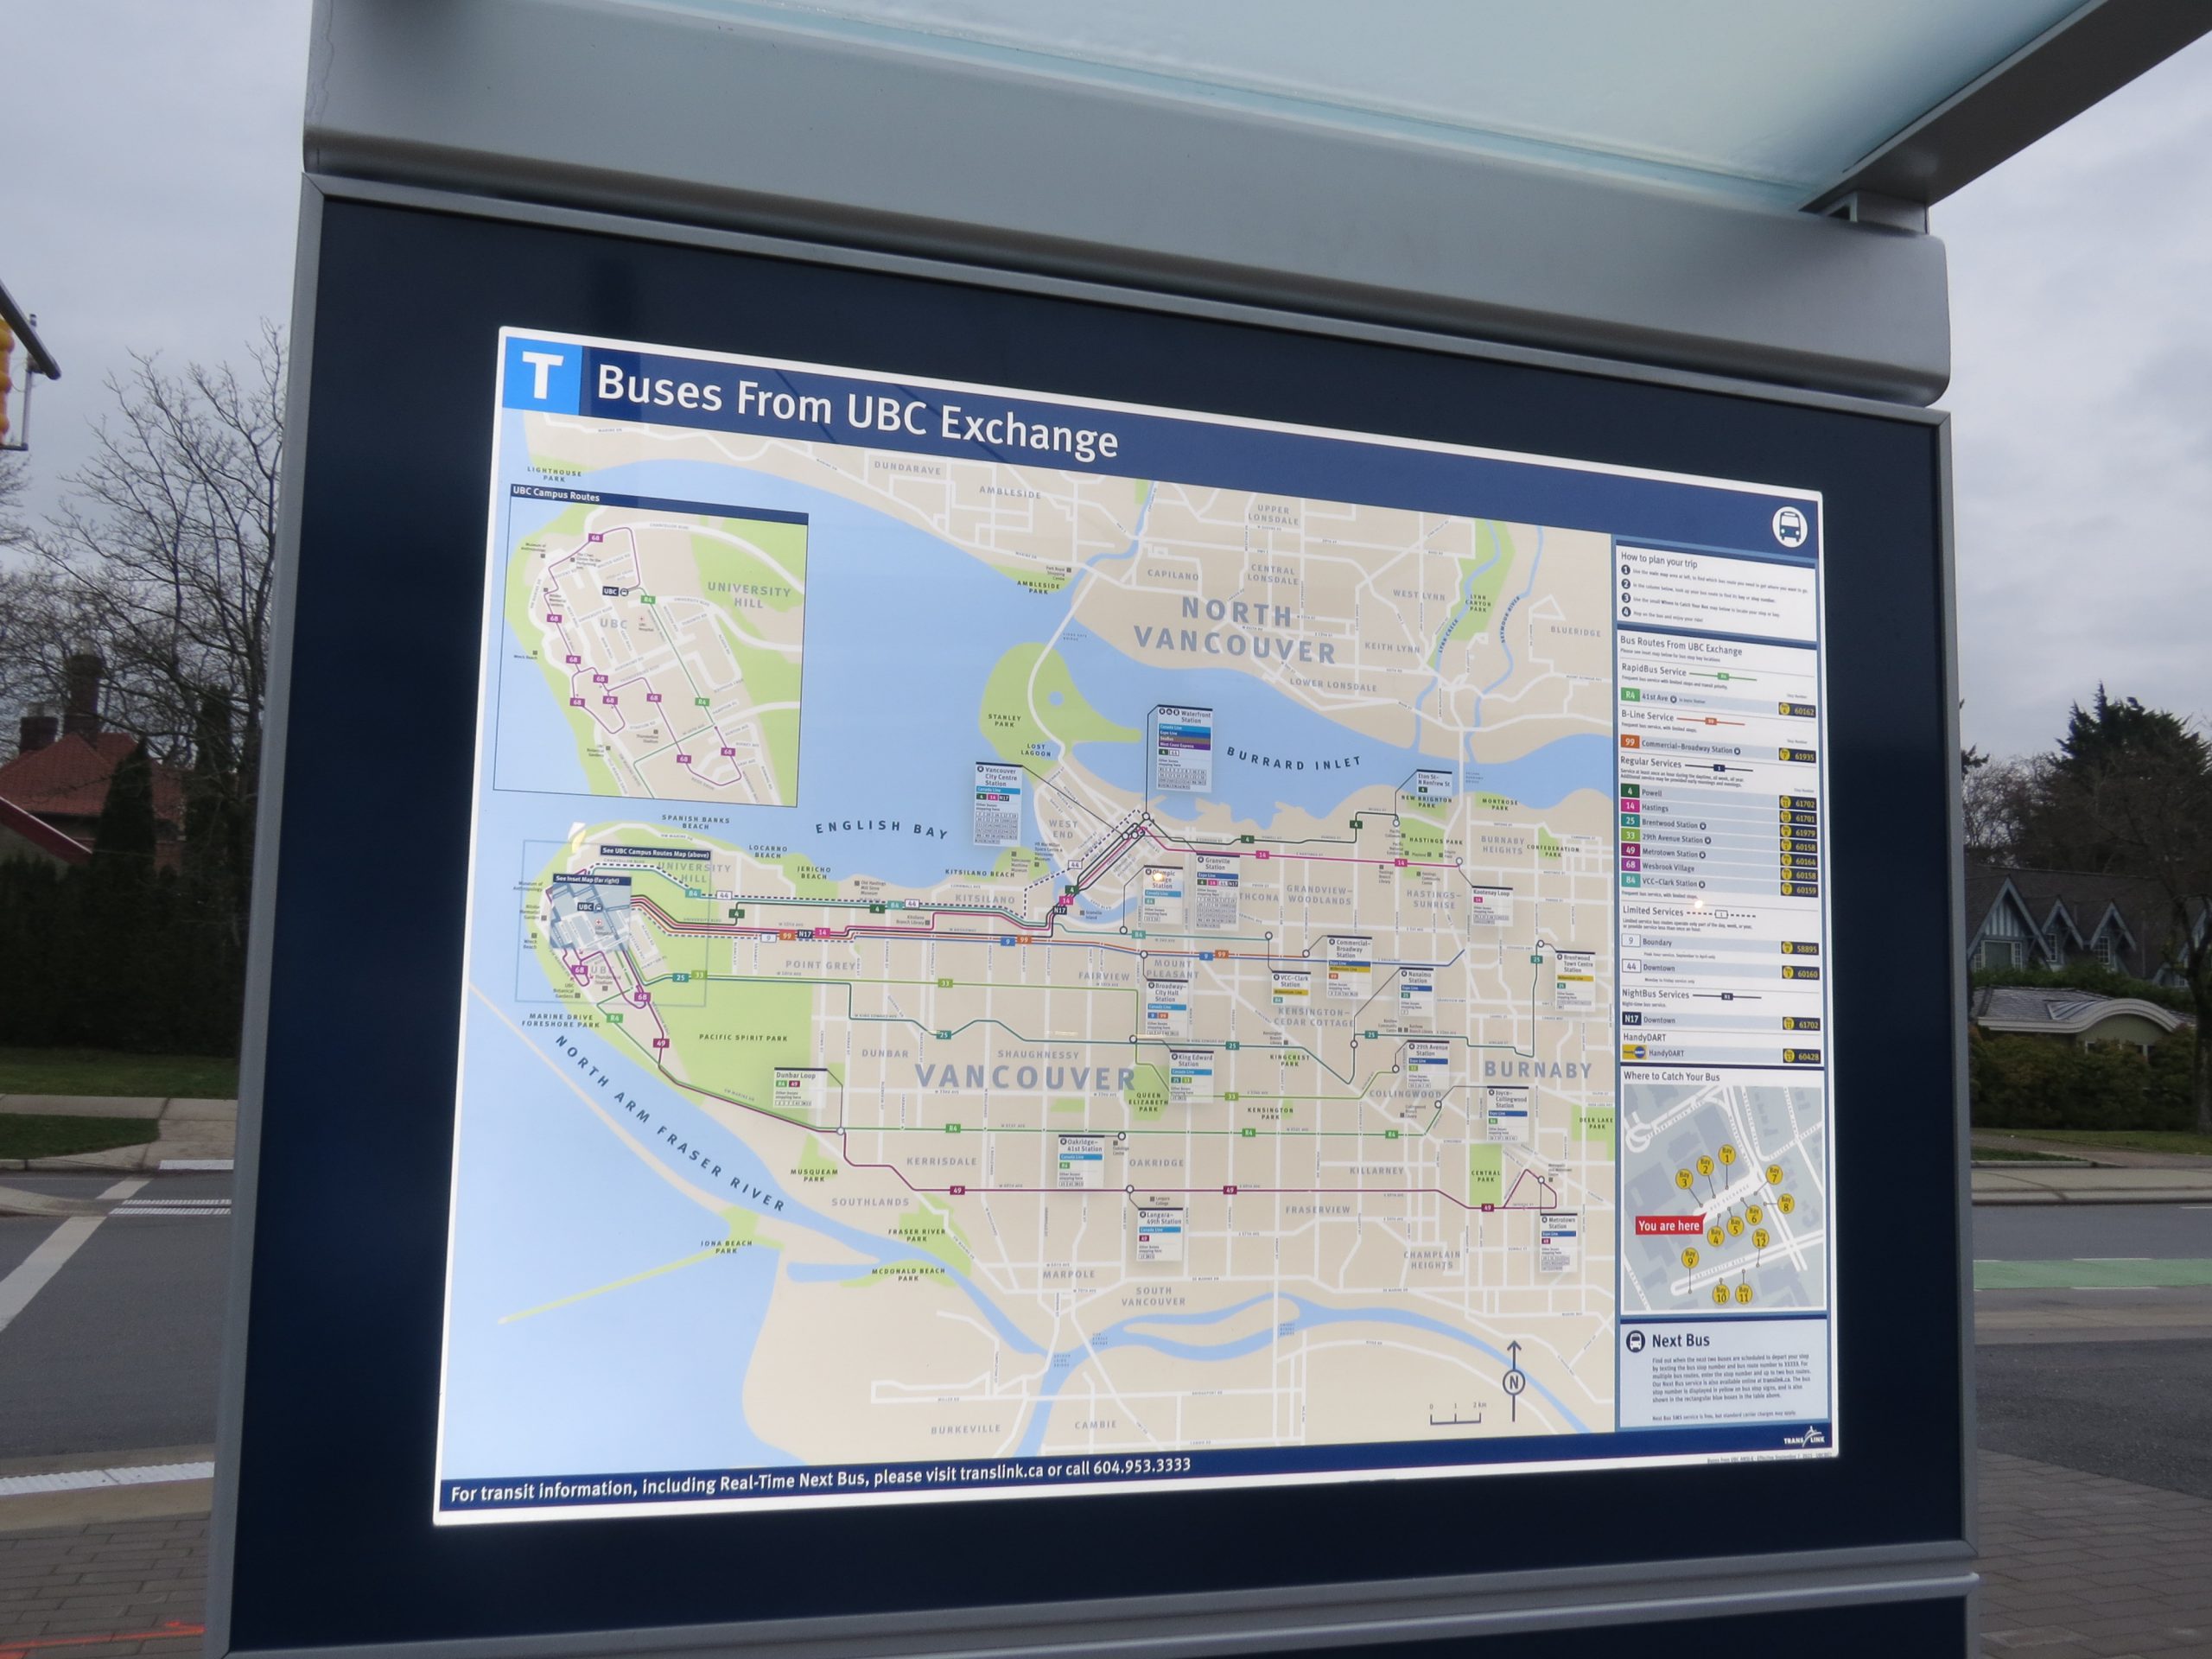 A central information board at UBC Exchange as part of the new next-bus screens